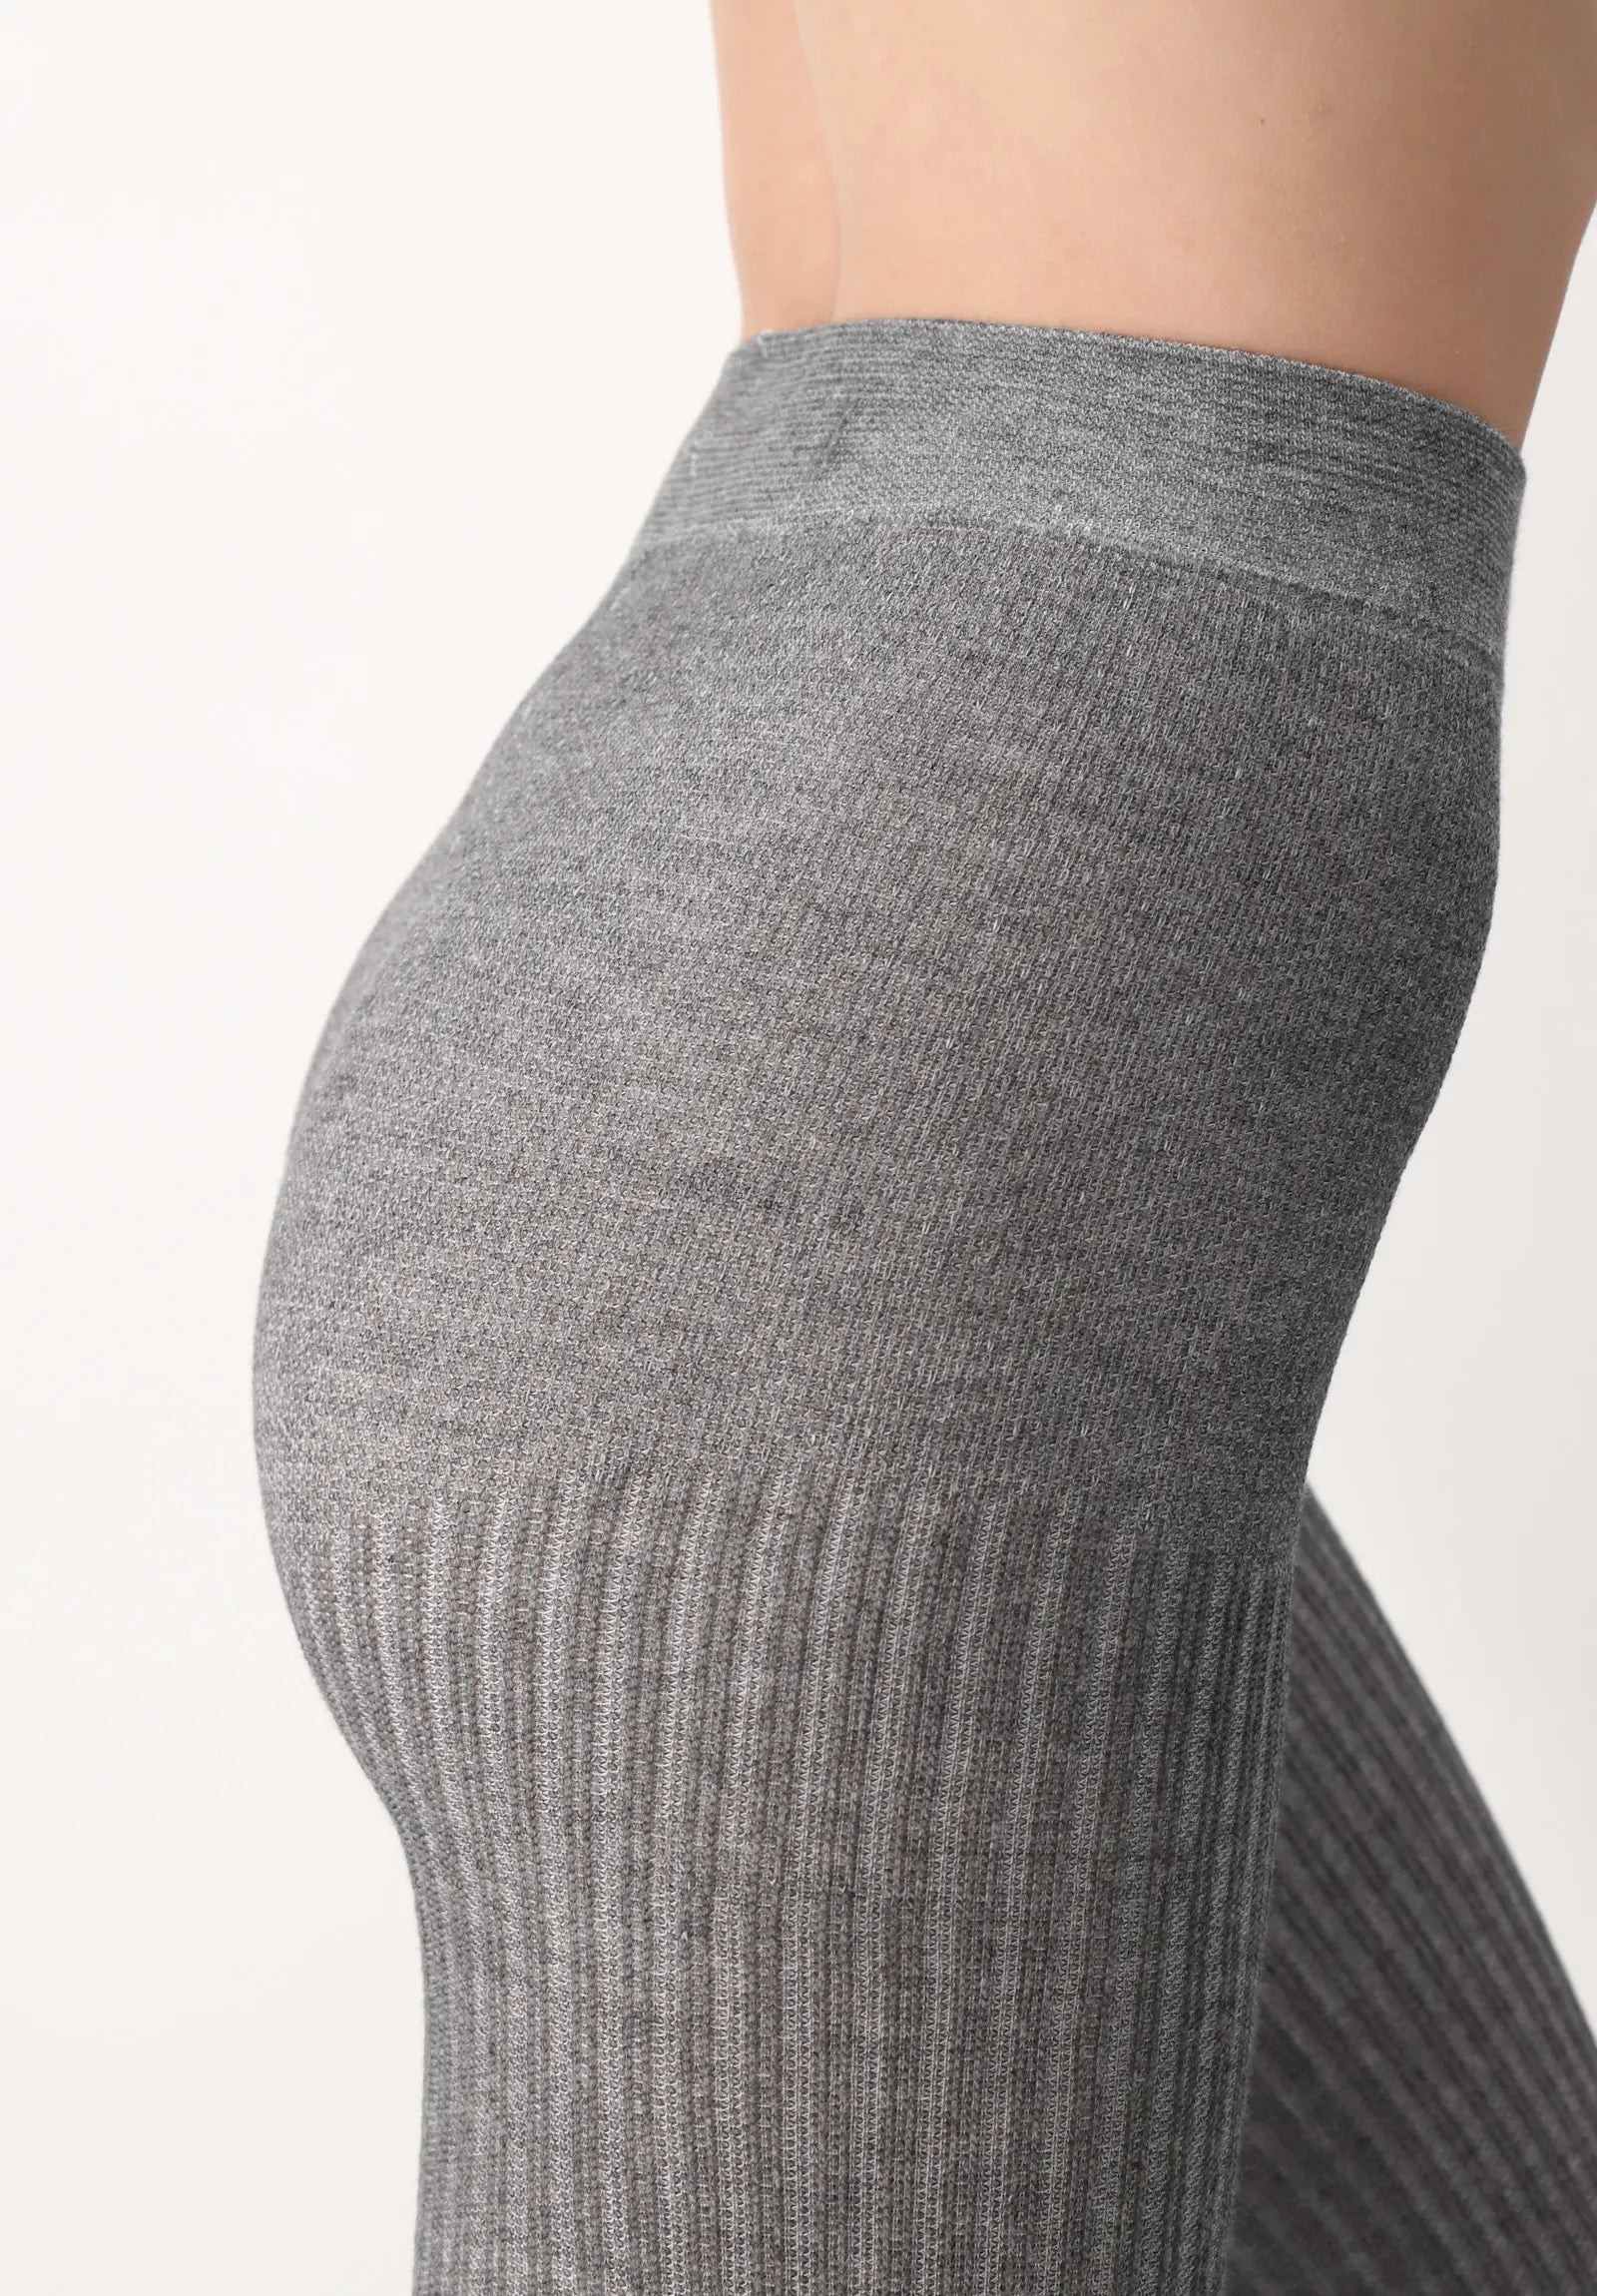 Oroblu Eco Natural Rib Collant - Light grey ribbed knitted tights made of soft recycled polyester and viscose with built in shoe liner socks.